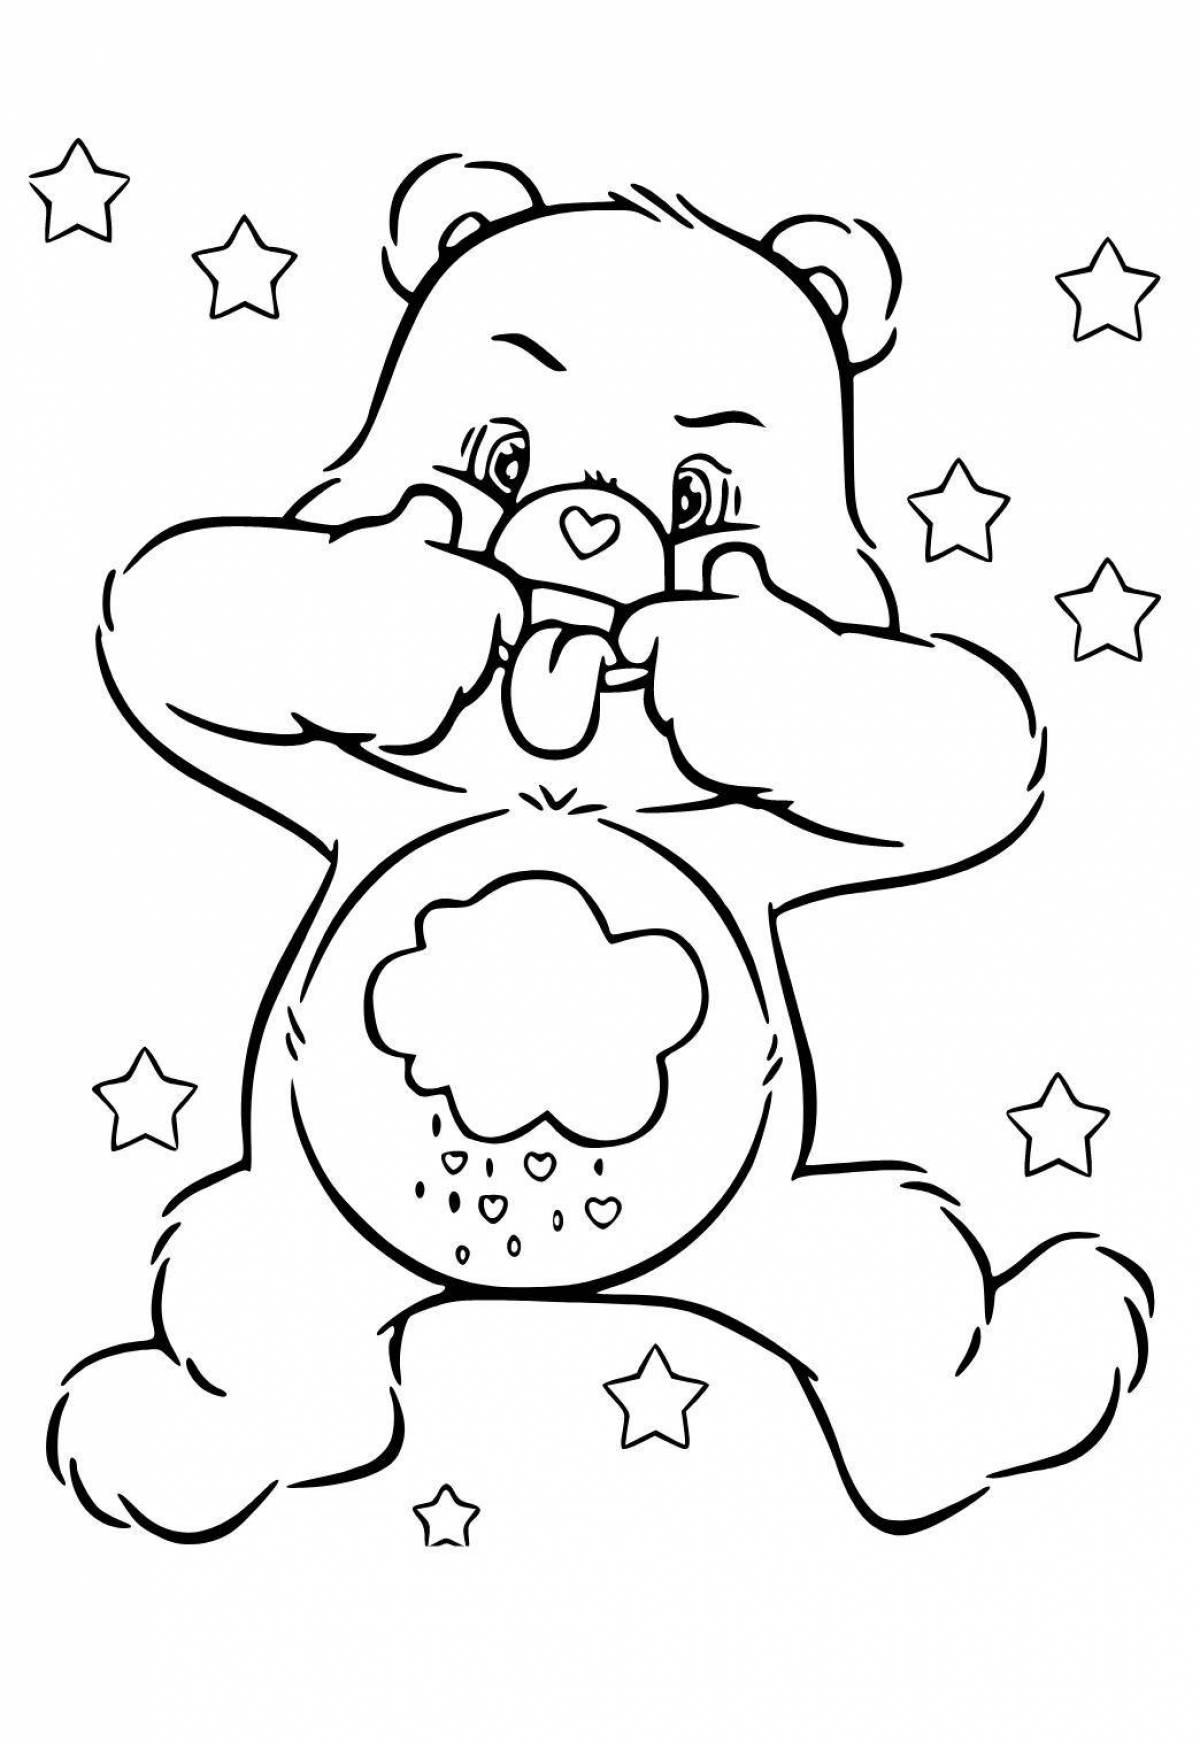 Cute and happy bear coloring book